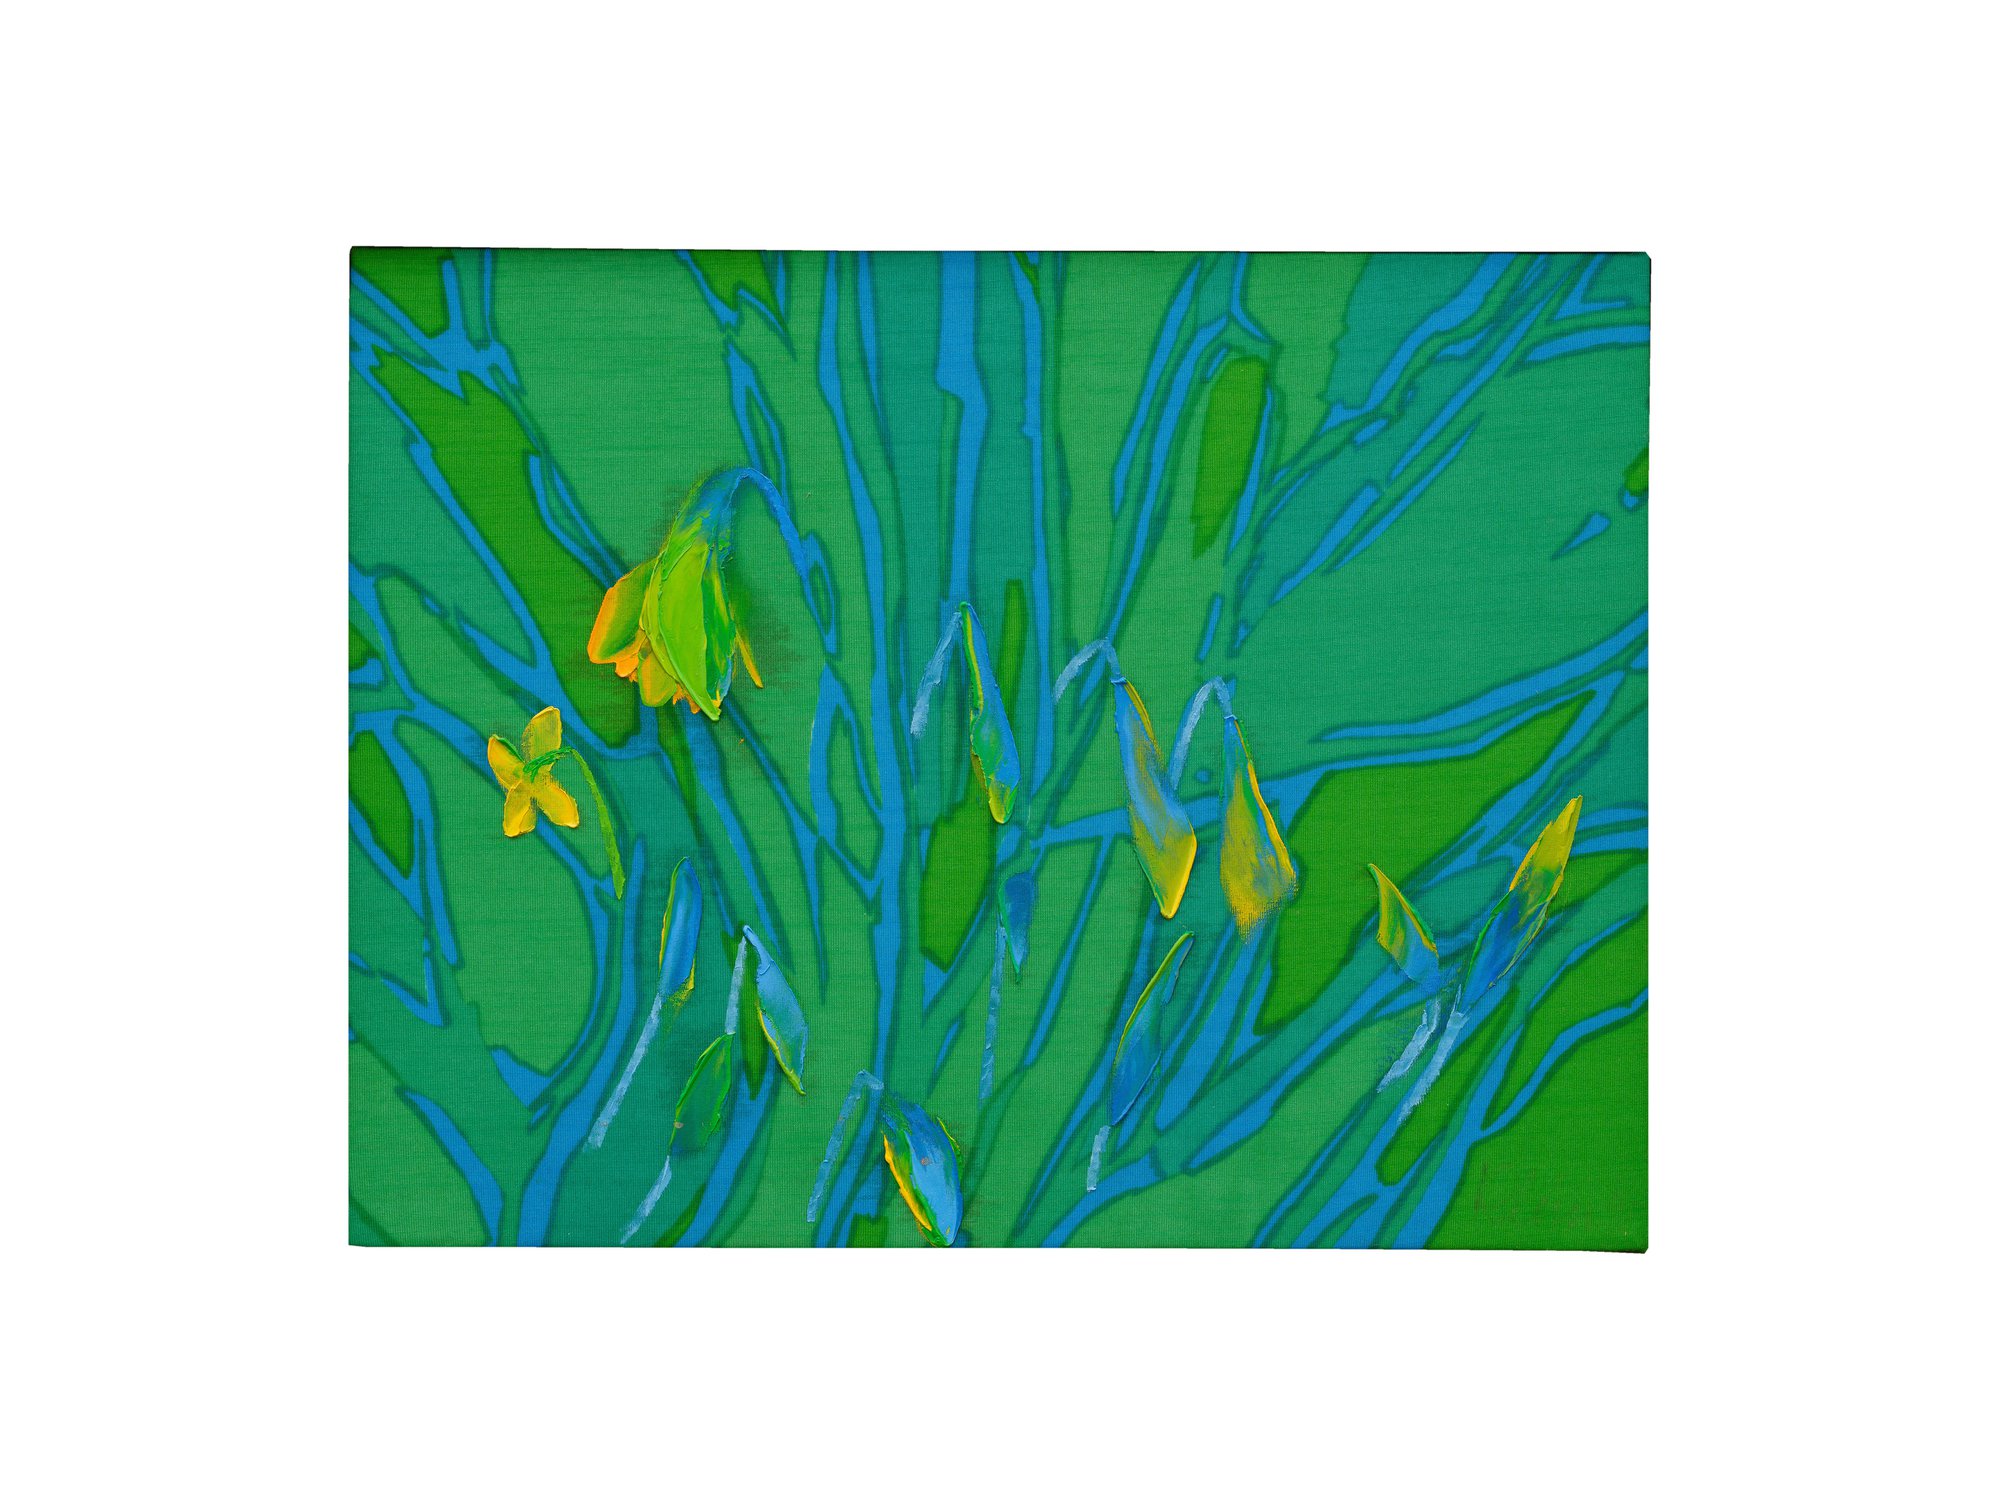 Bernat Klein, Daffodils on Viridian, oil on screen printed knitted jersey polyester (Diolen), 40 x 51 cm, 1996